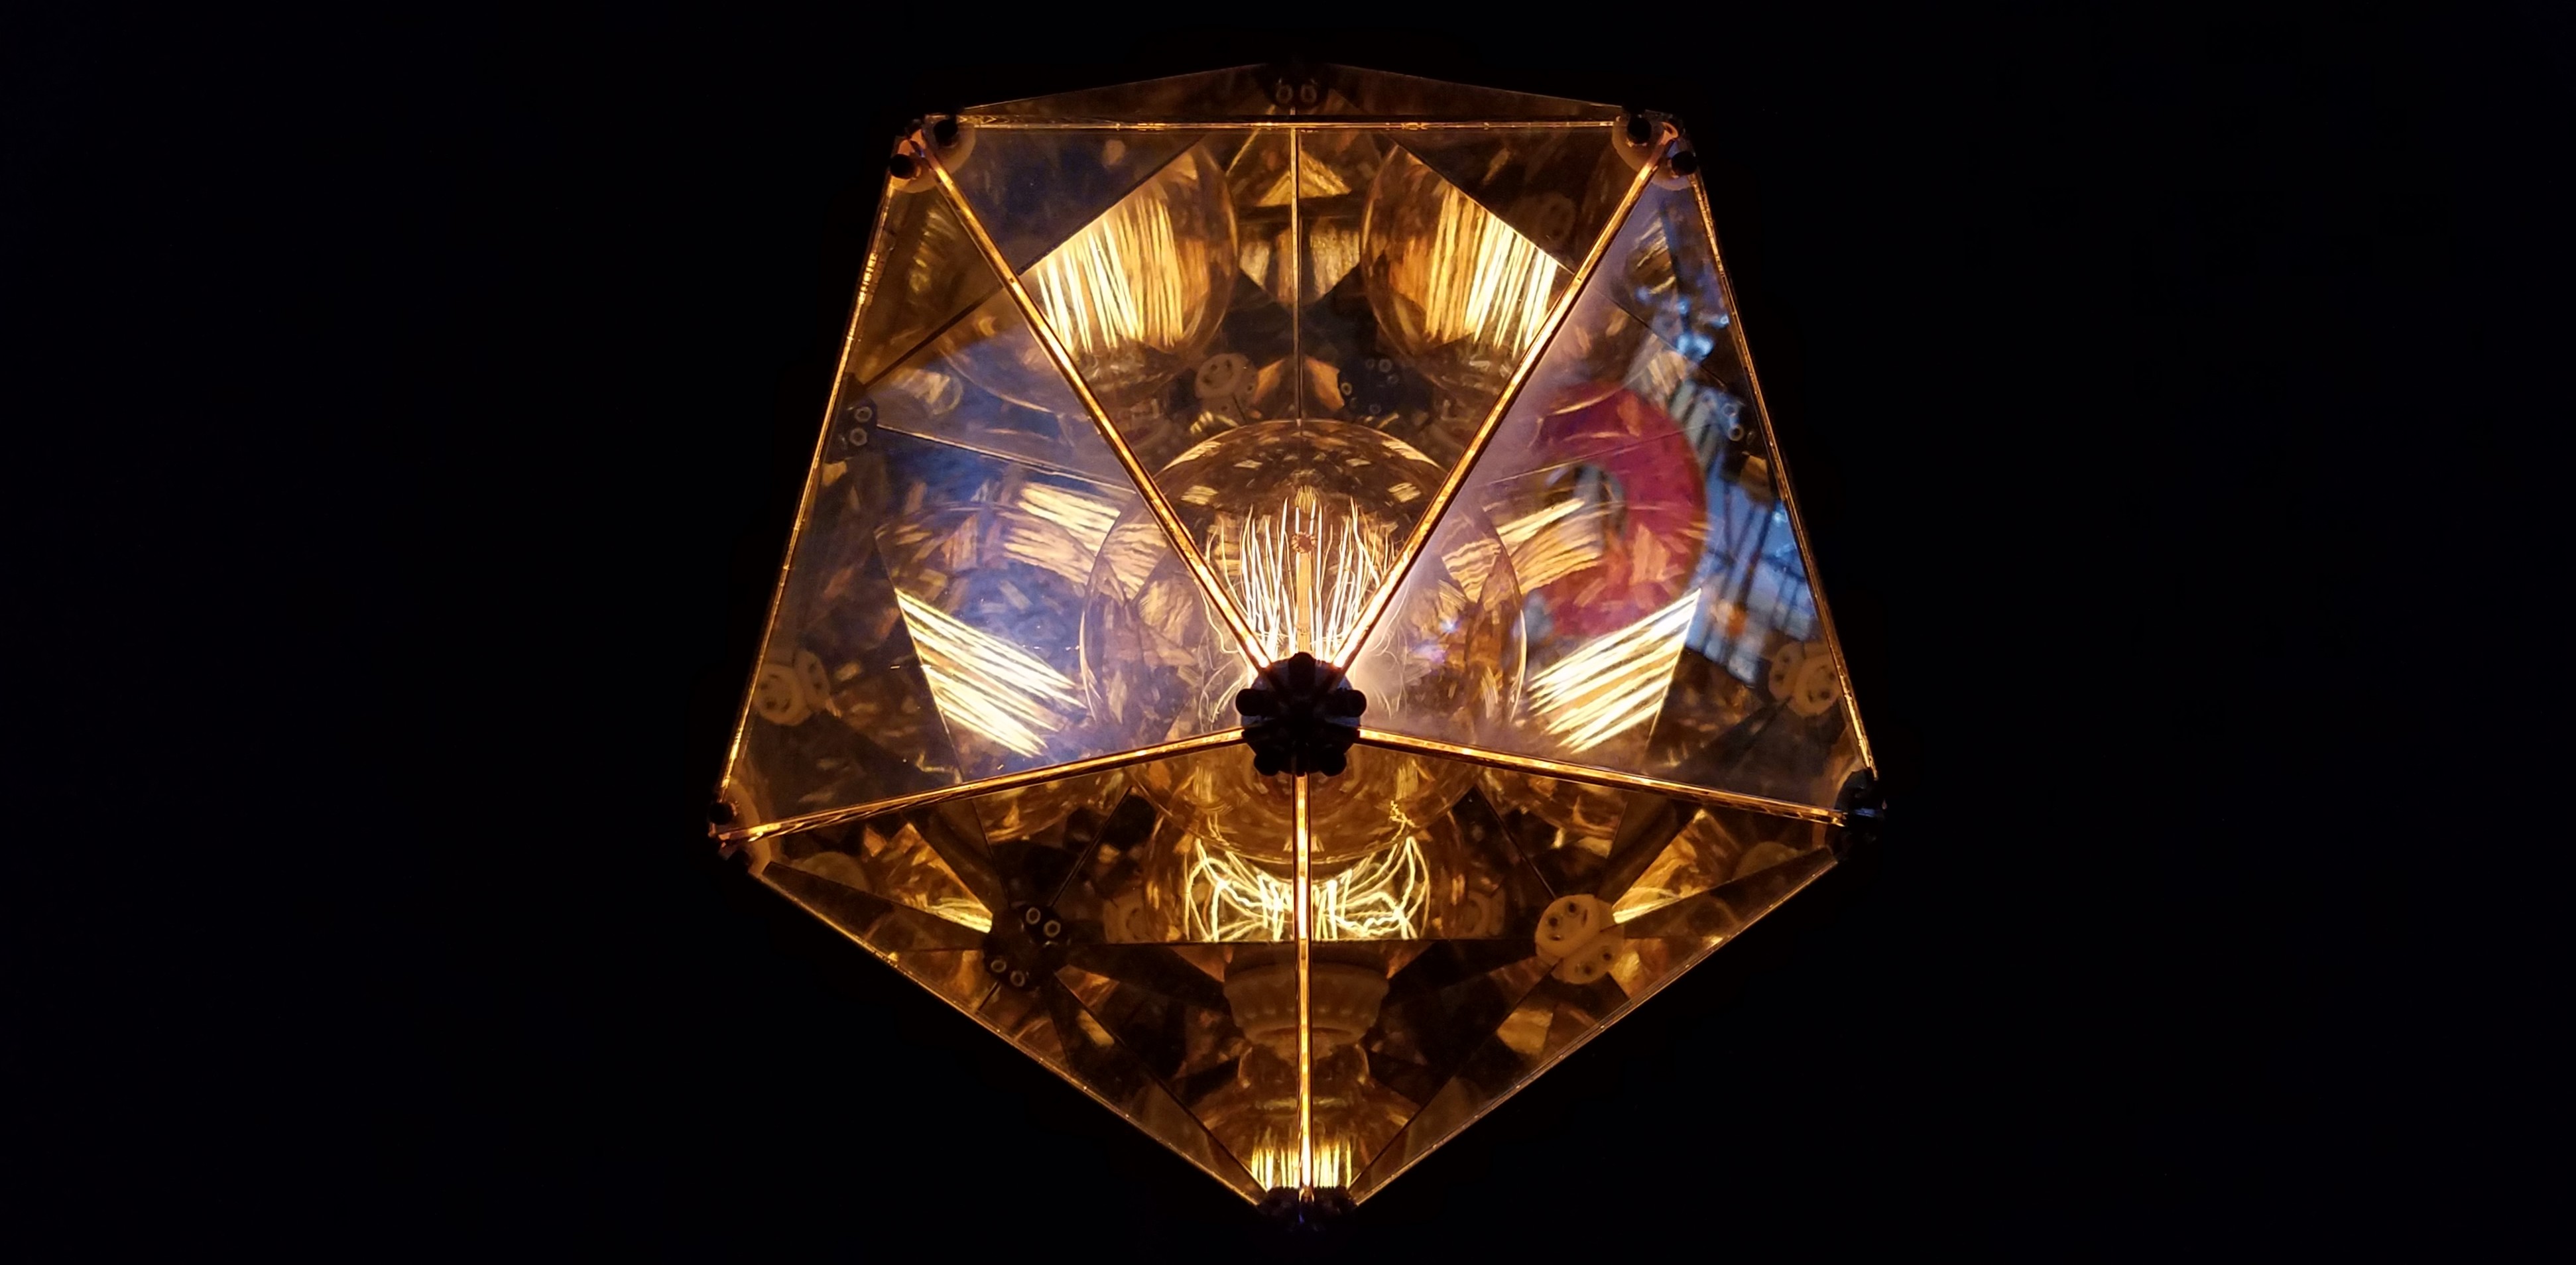 Image of a mirror lamp